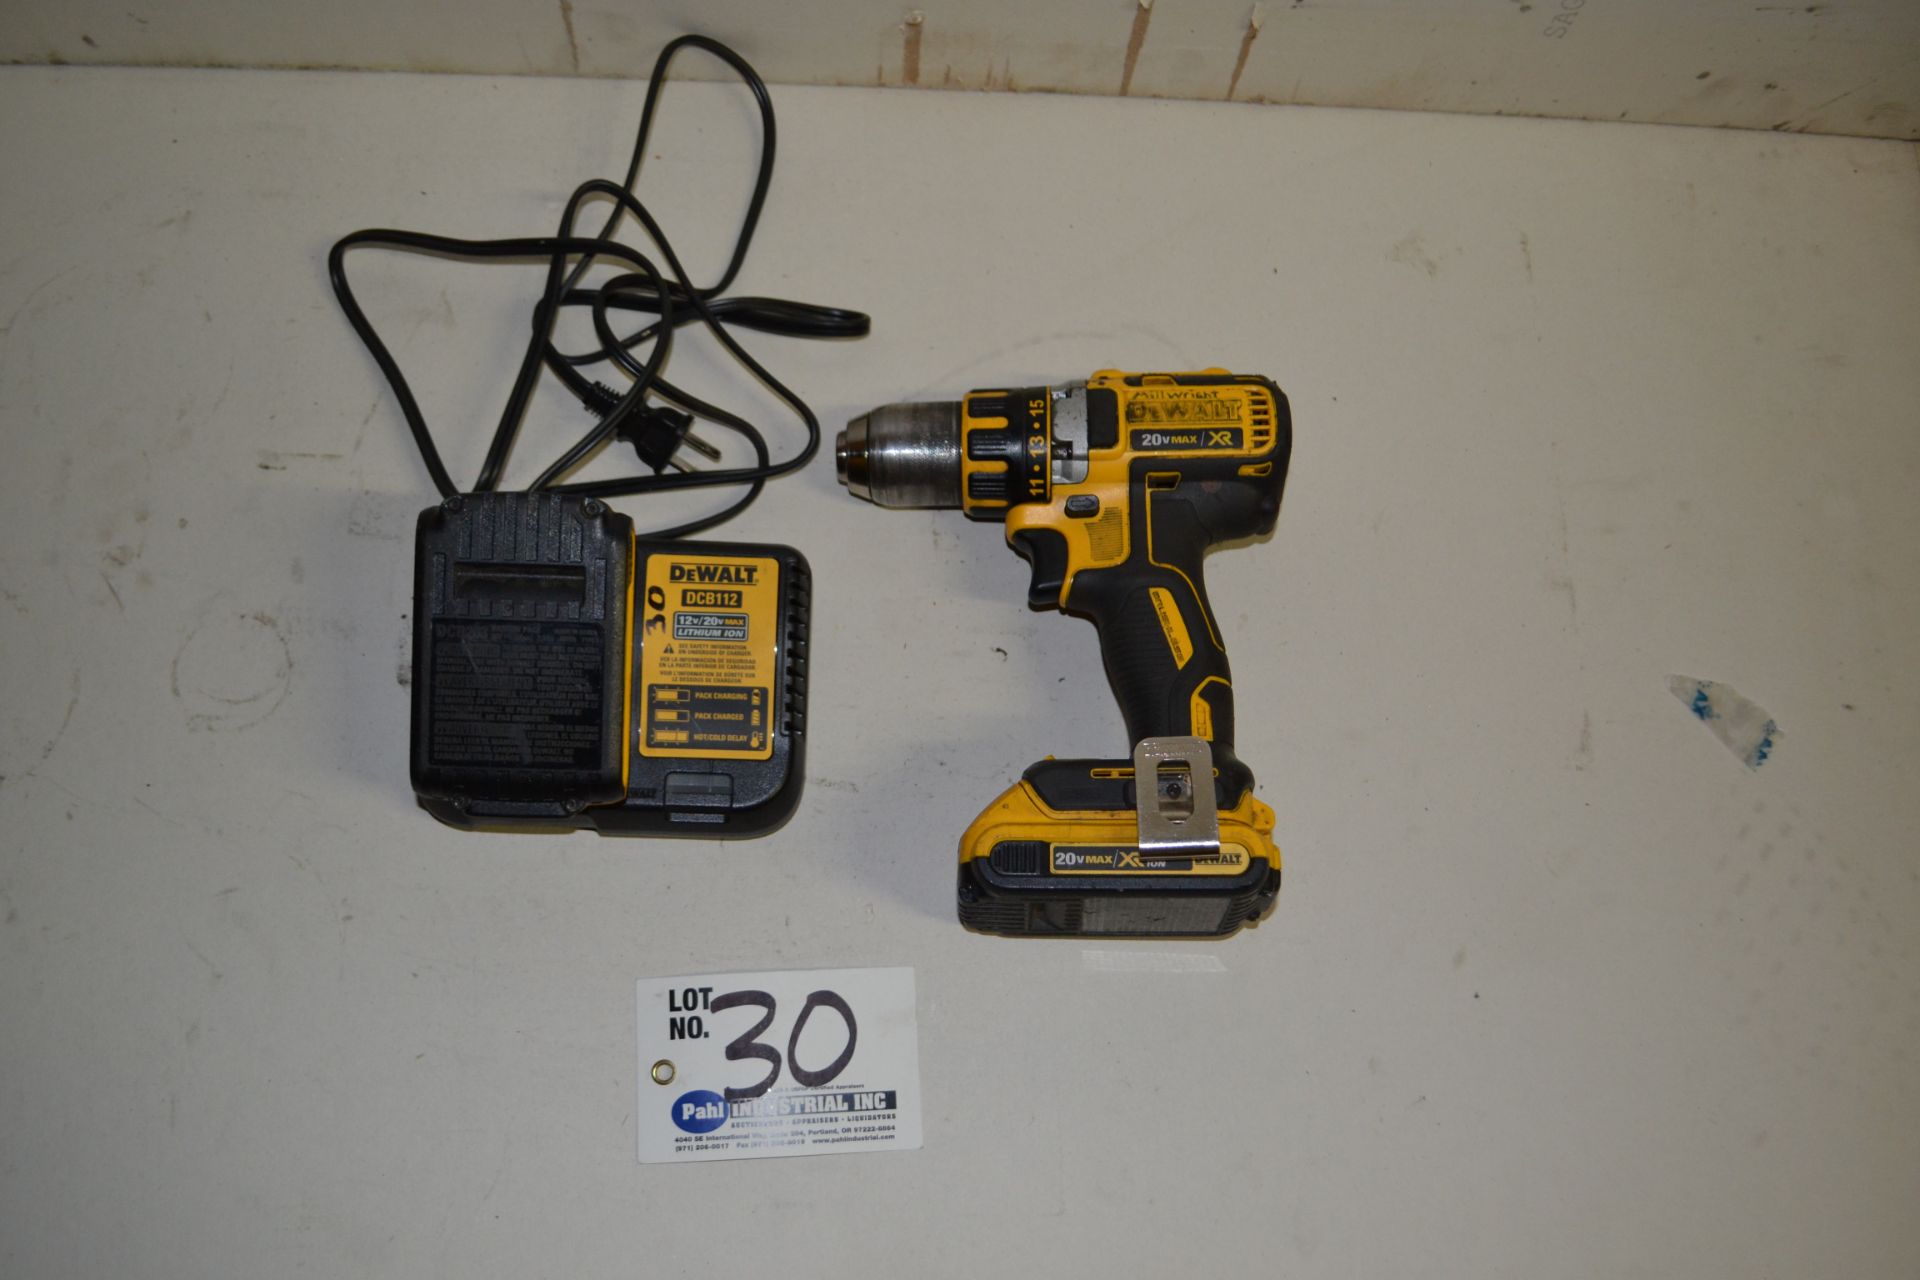 DeWalt DCD790 1/2" Cordless Drill Driver c/w Battery and Charger